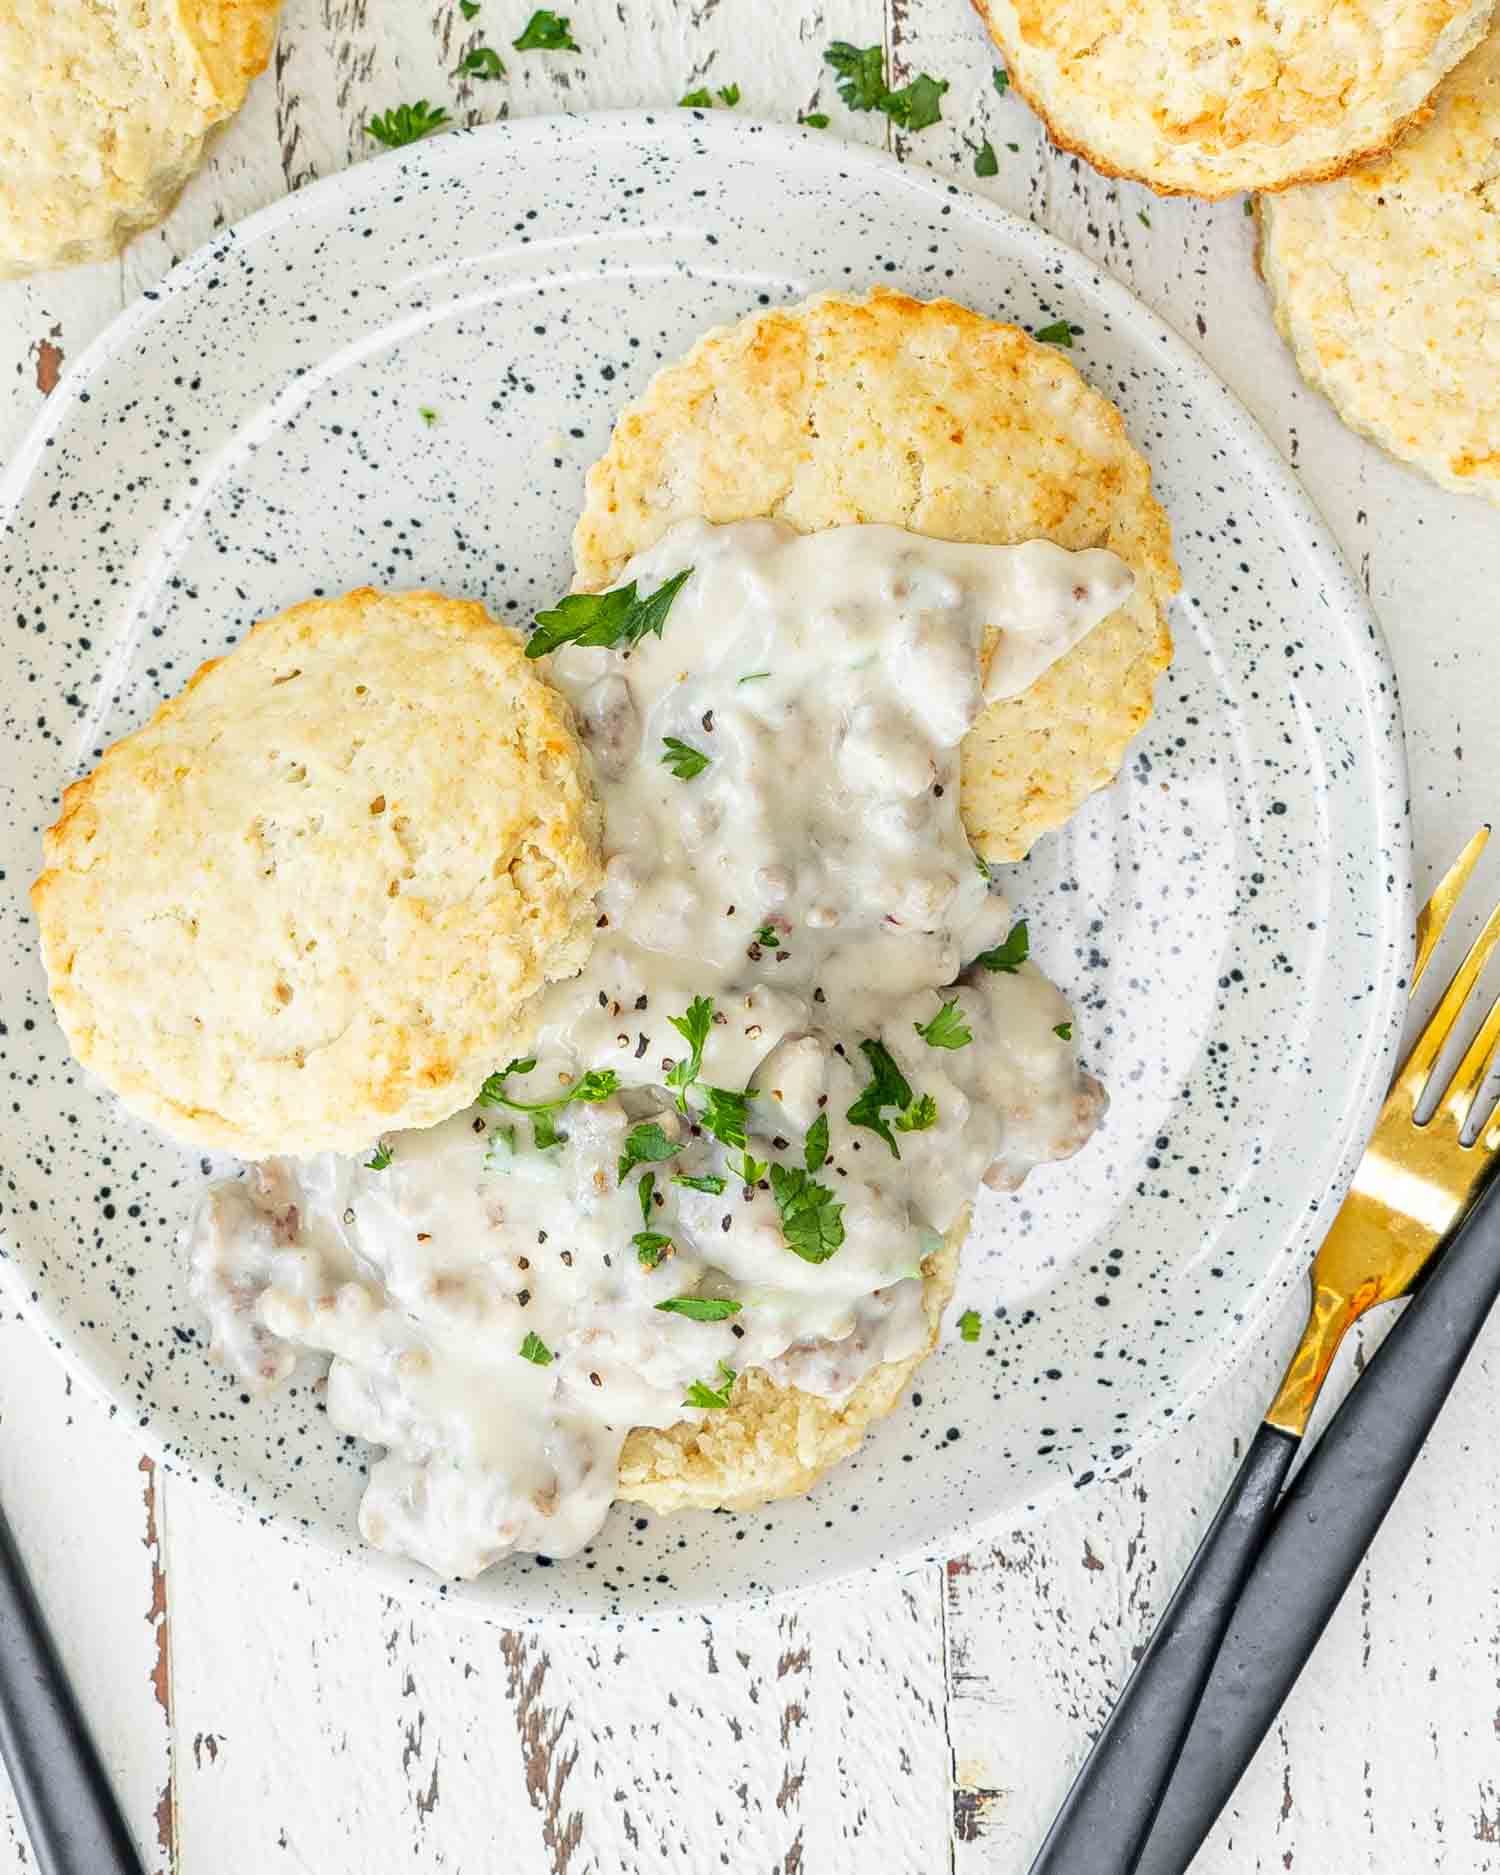 biscuits and gravy on a white little plate garnished with parsley.